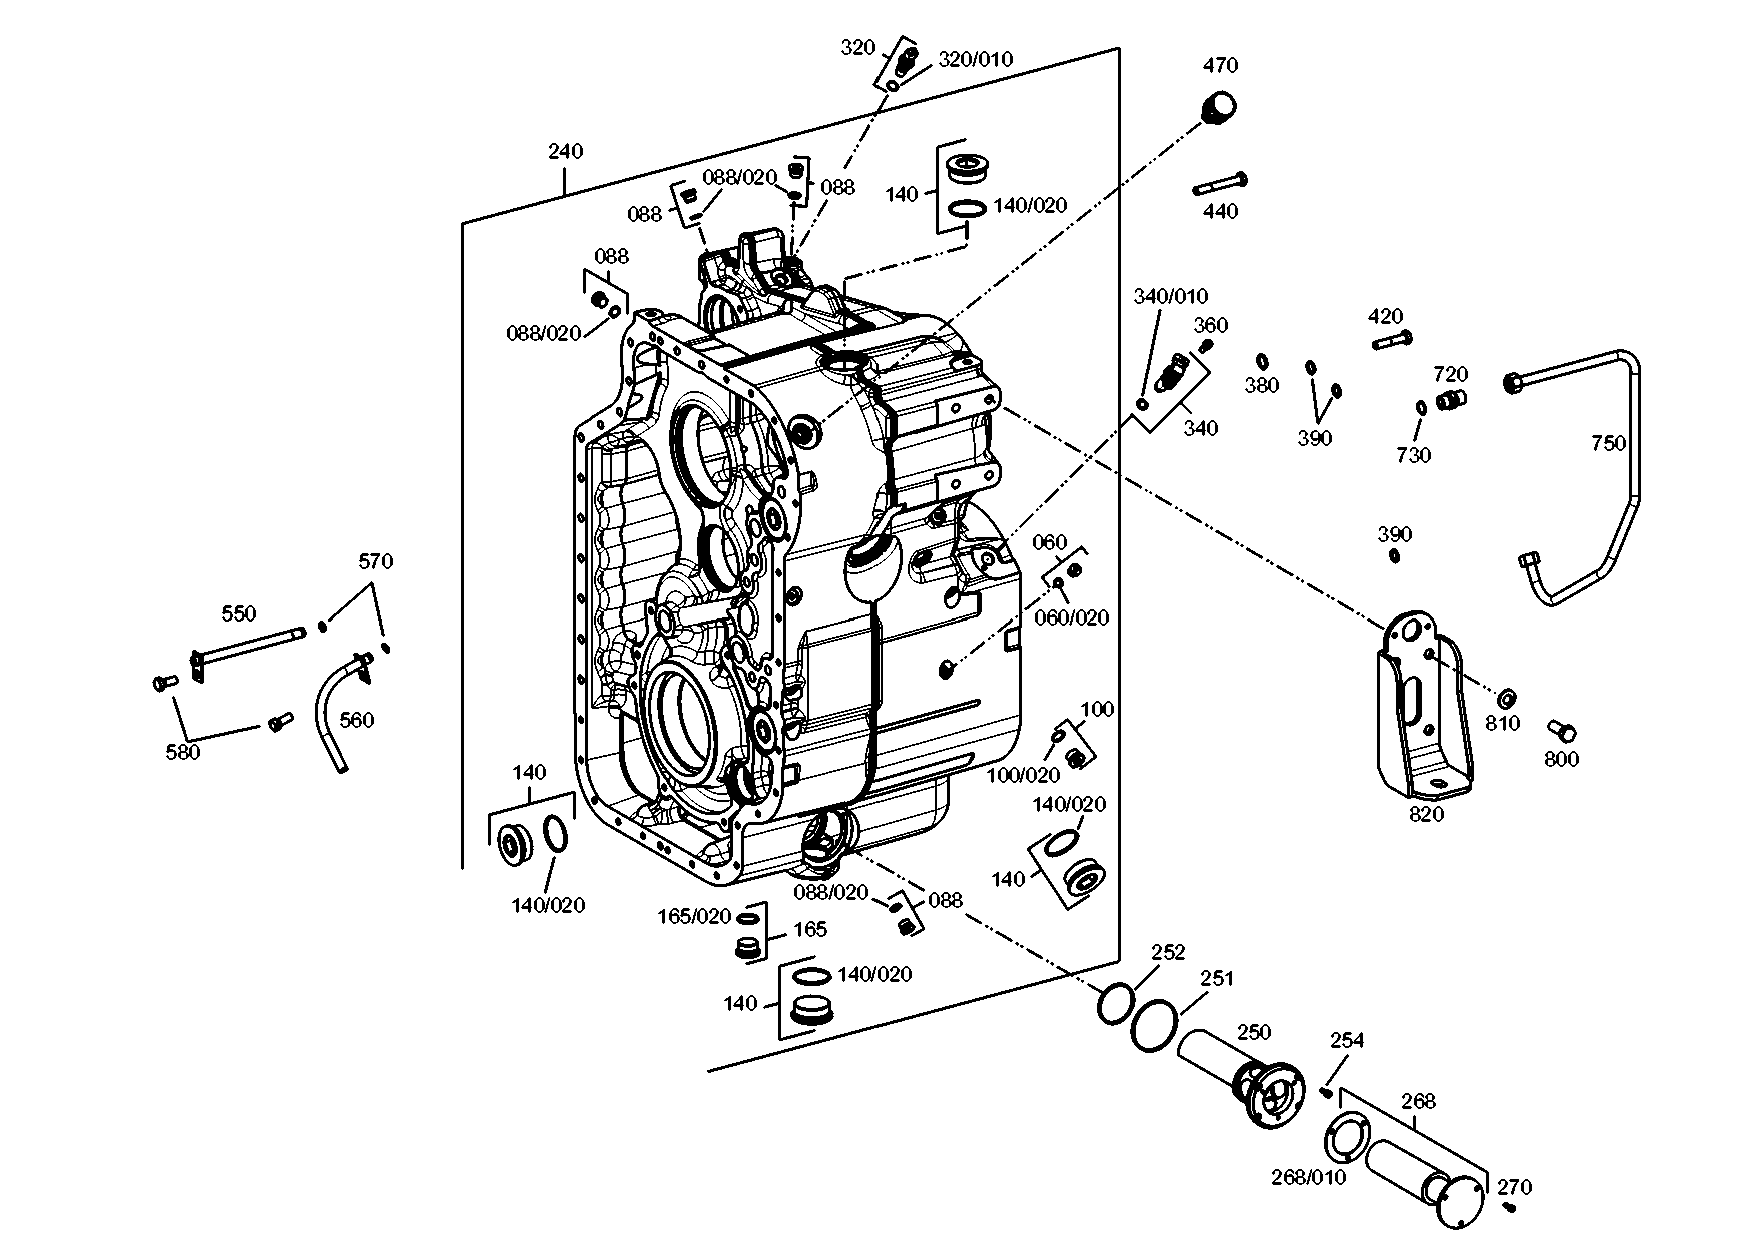 drawing for CLAAS CSE 0109051.0 - DIRECTIONAL VALVE (figure 4)